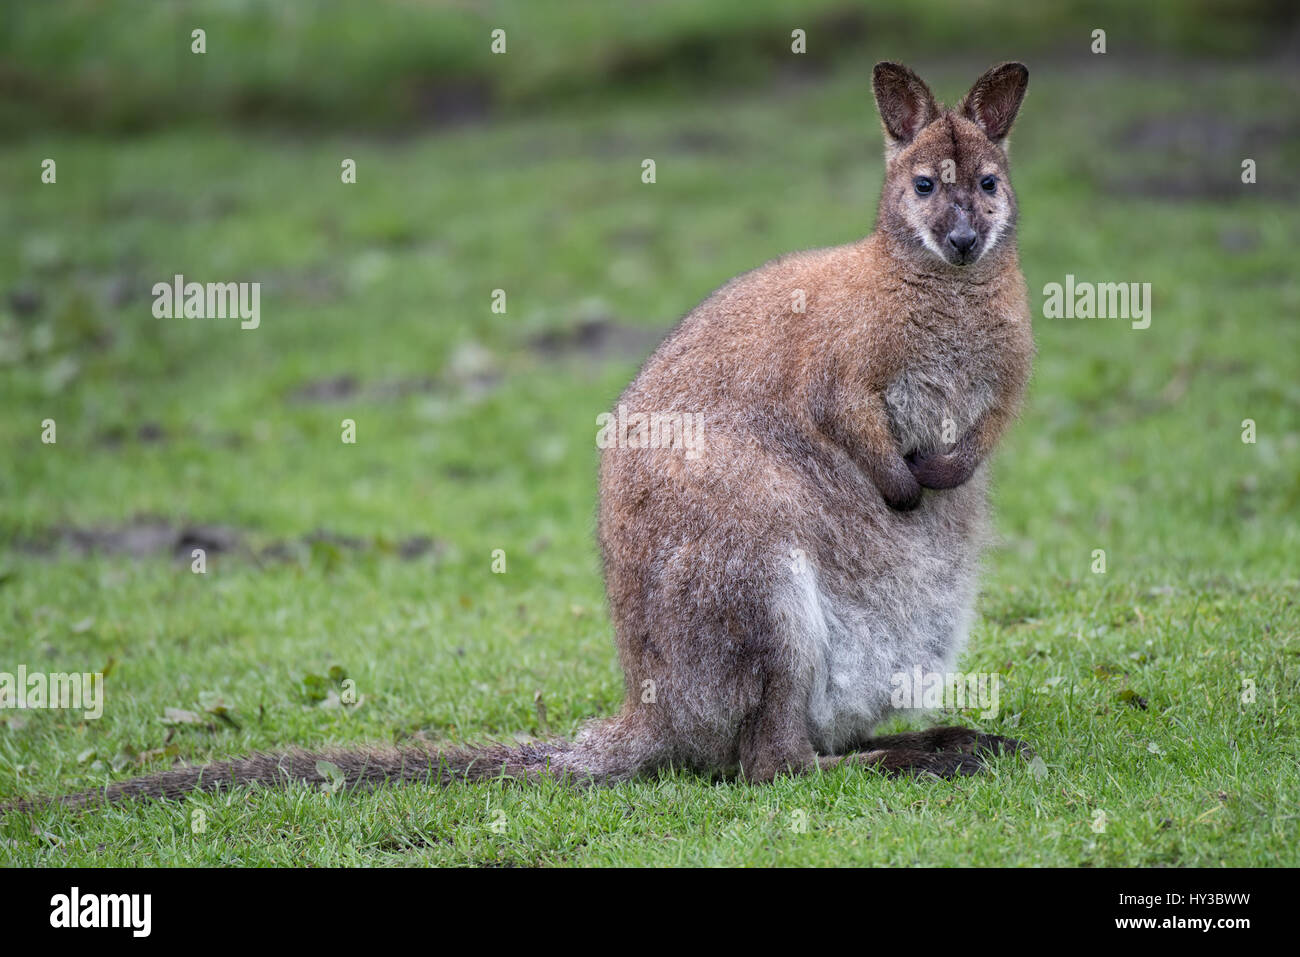 A full length horizontal portrait of a wallaby sitting on the grass alert and facing forward Stock Photo